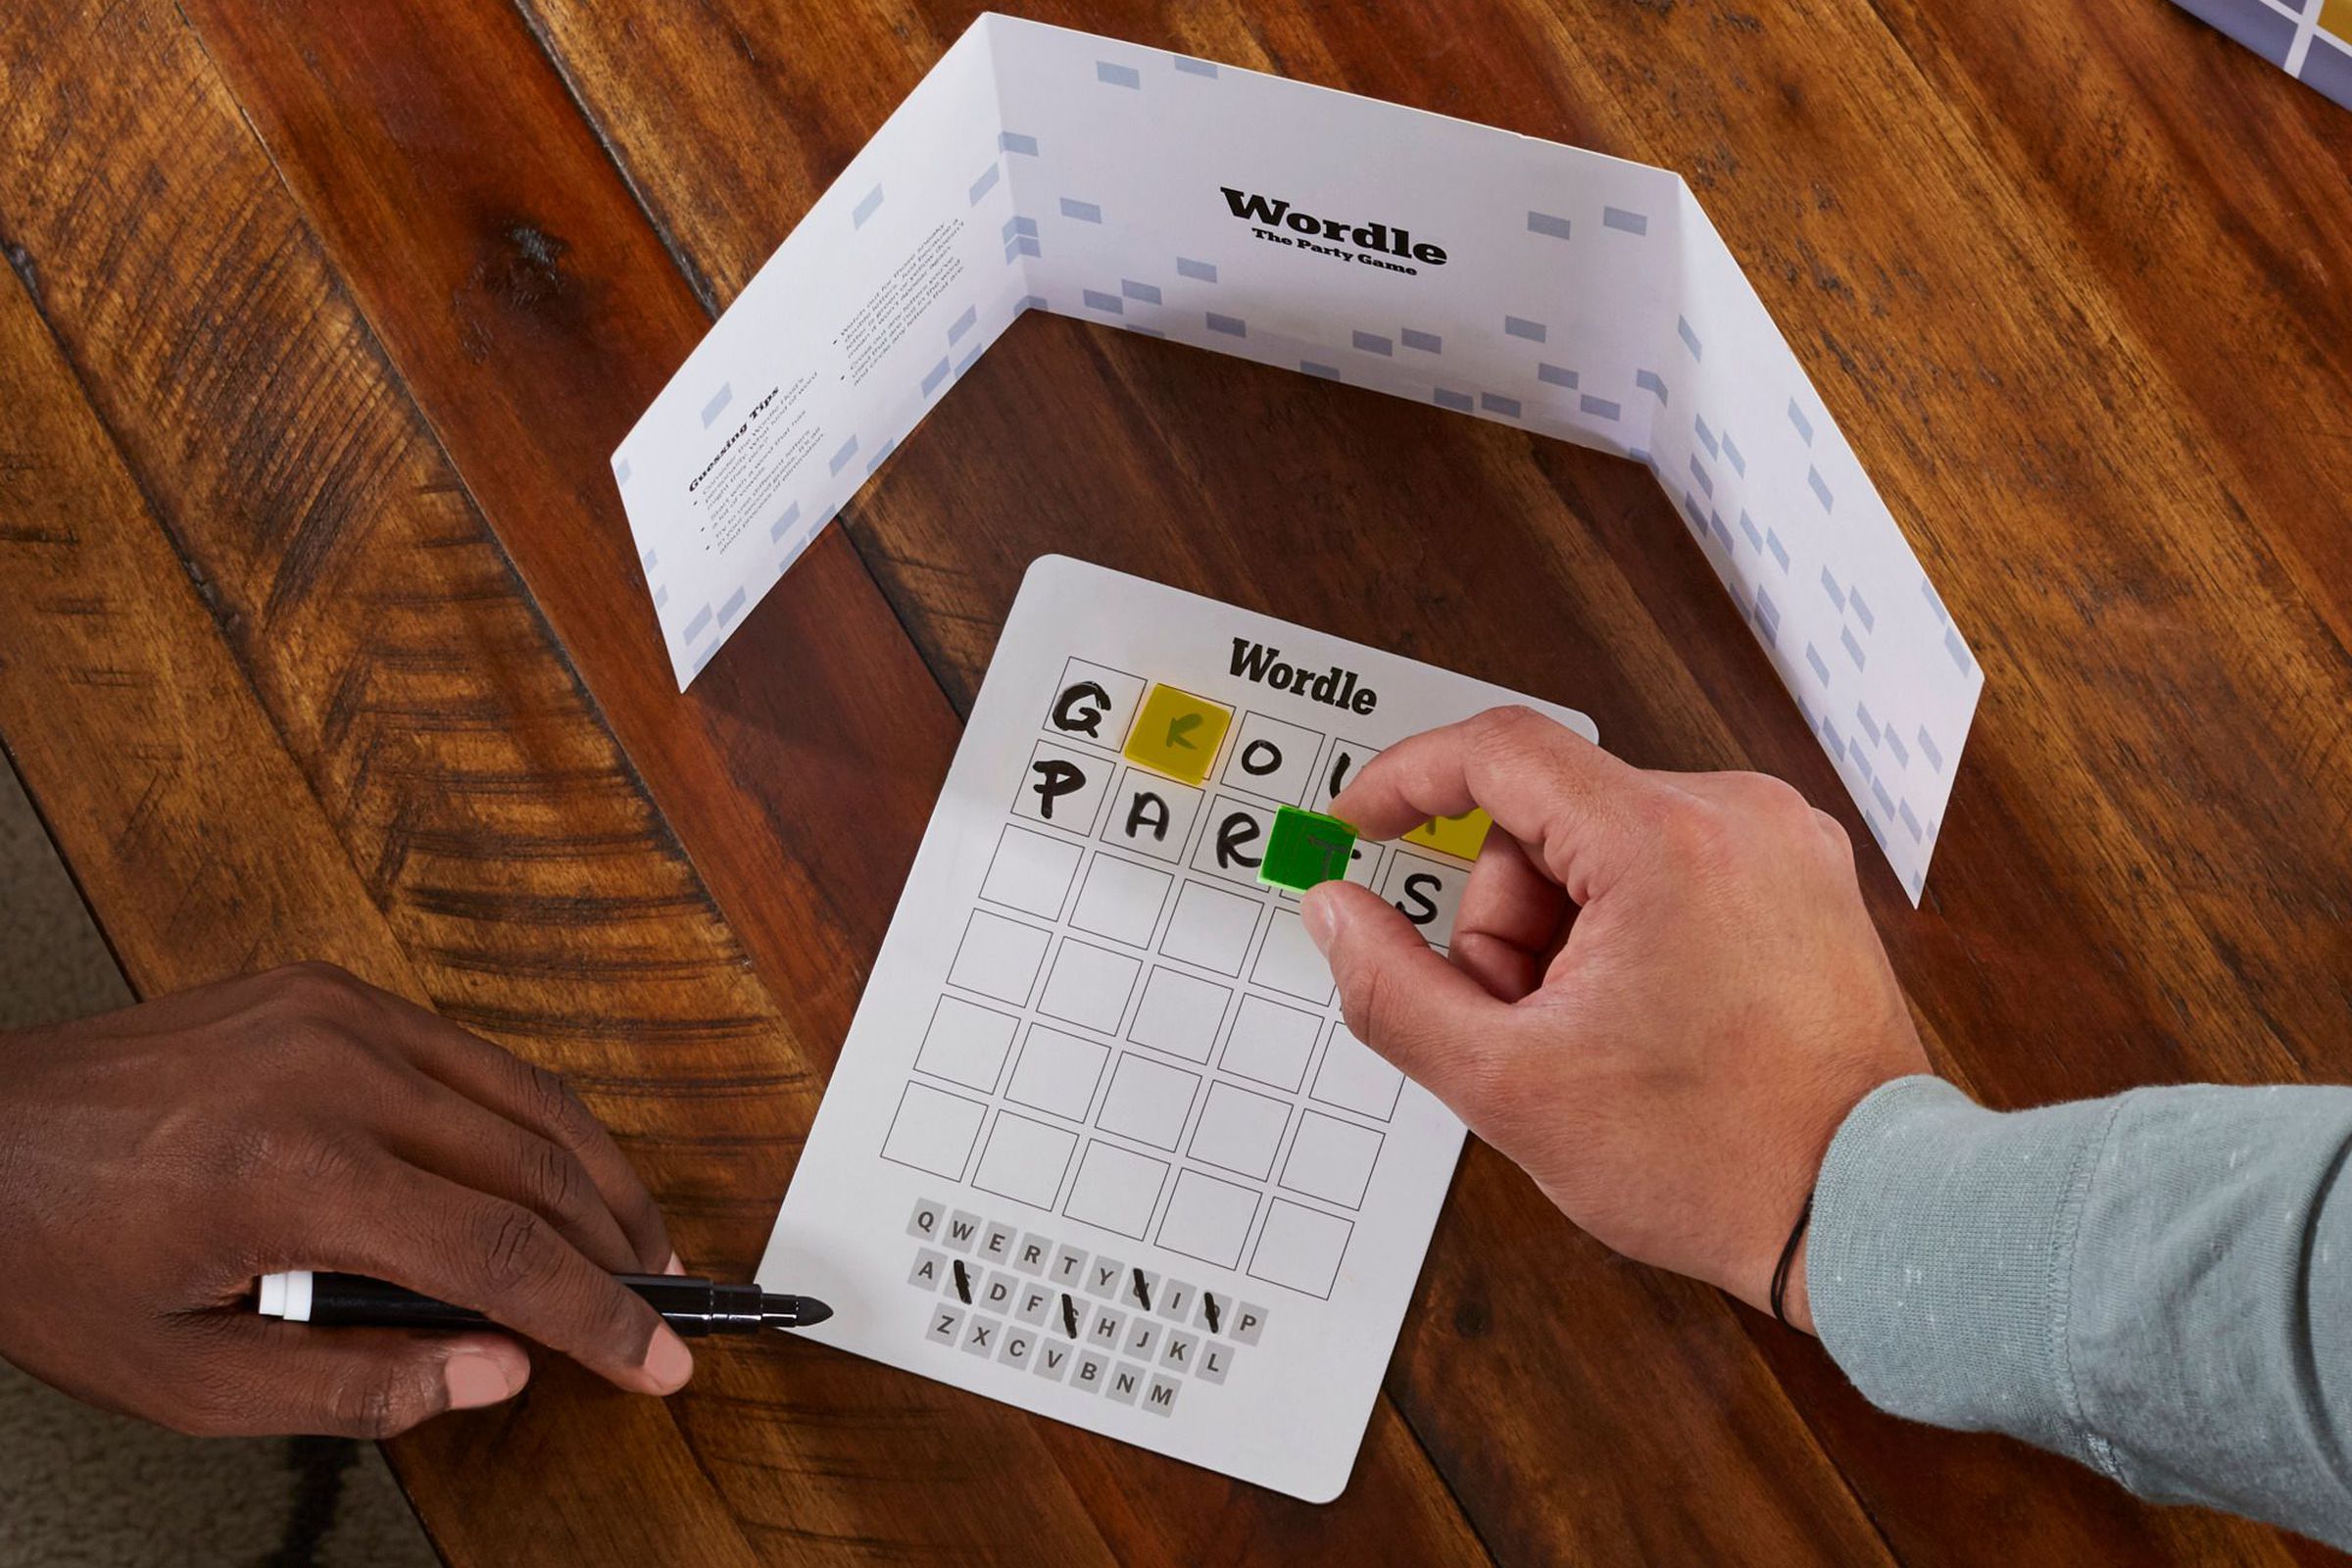 Play Wordle with your friends in this new board game.